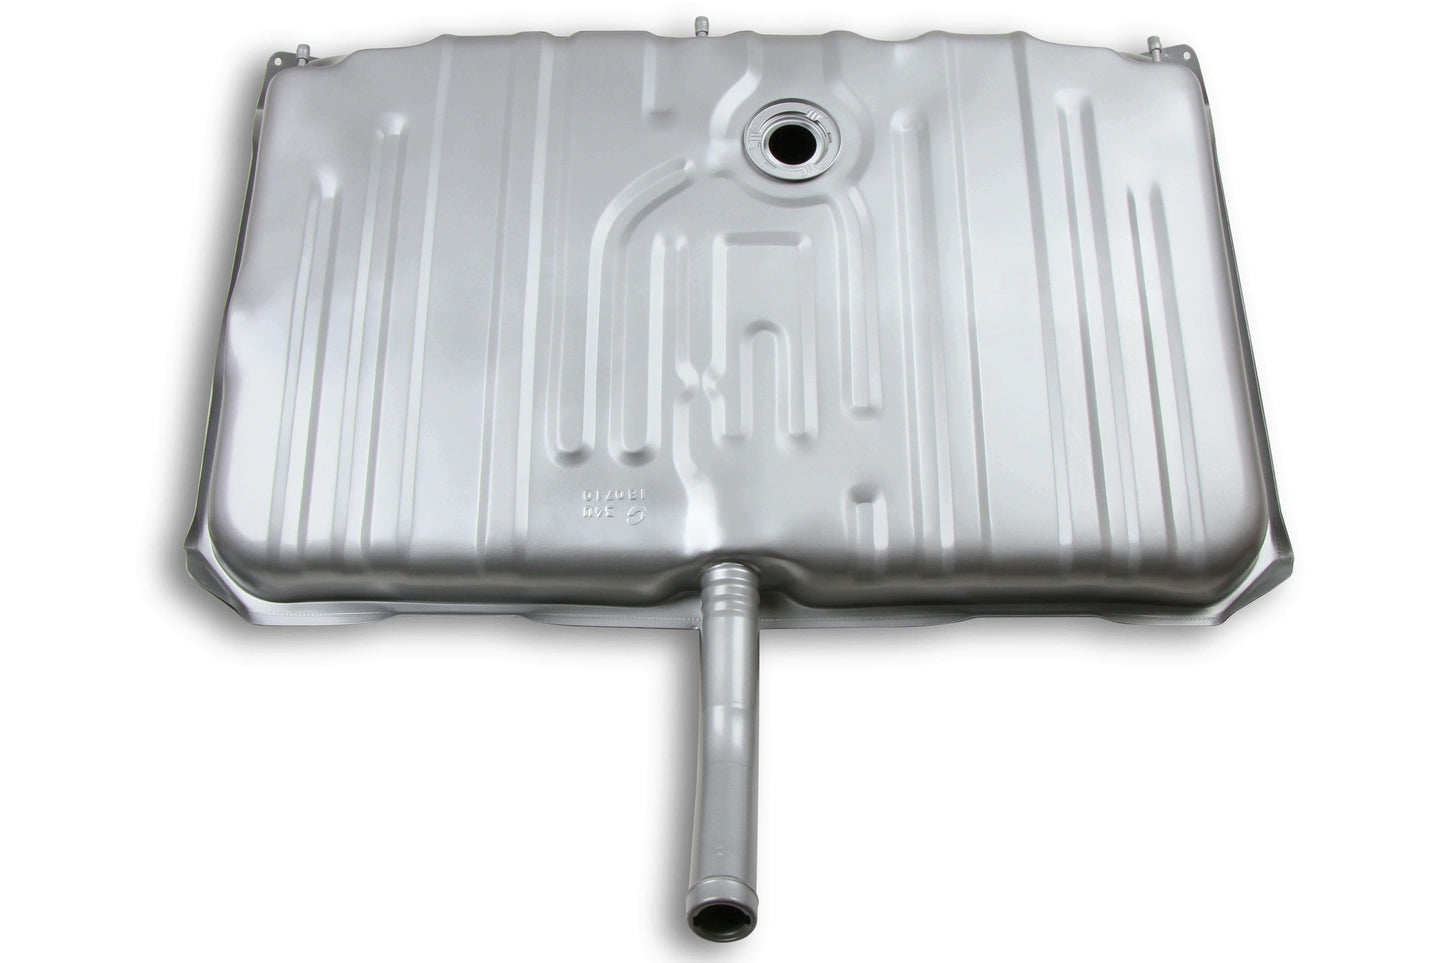 Stock Replacement Fuel Tank - 19-517